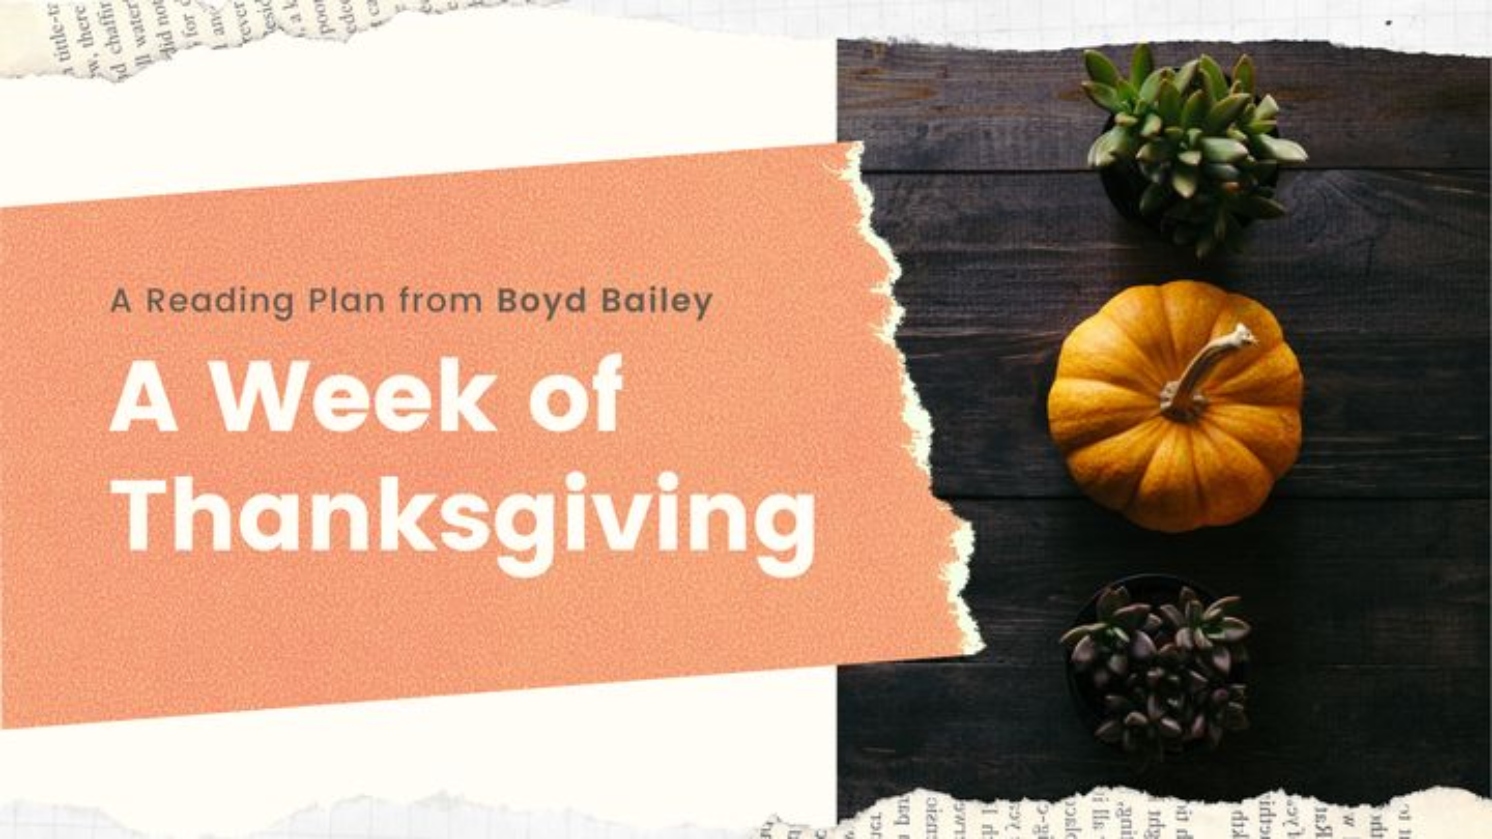 A Week of Thanksgiving